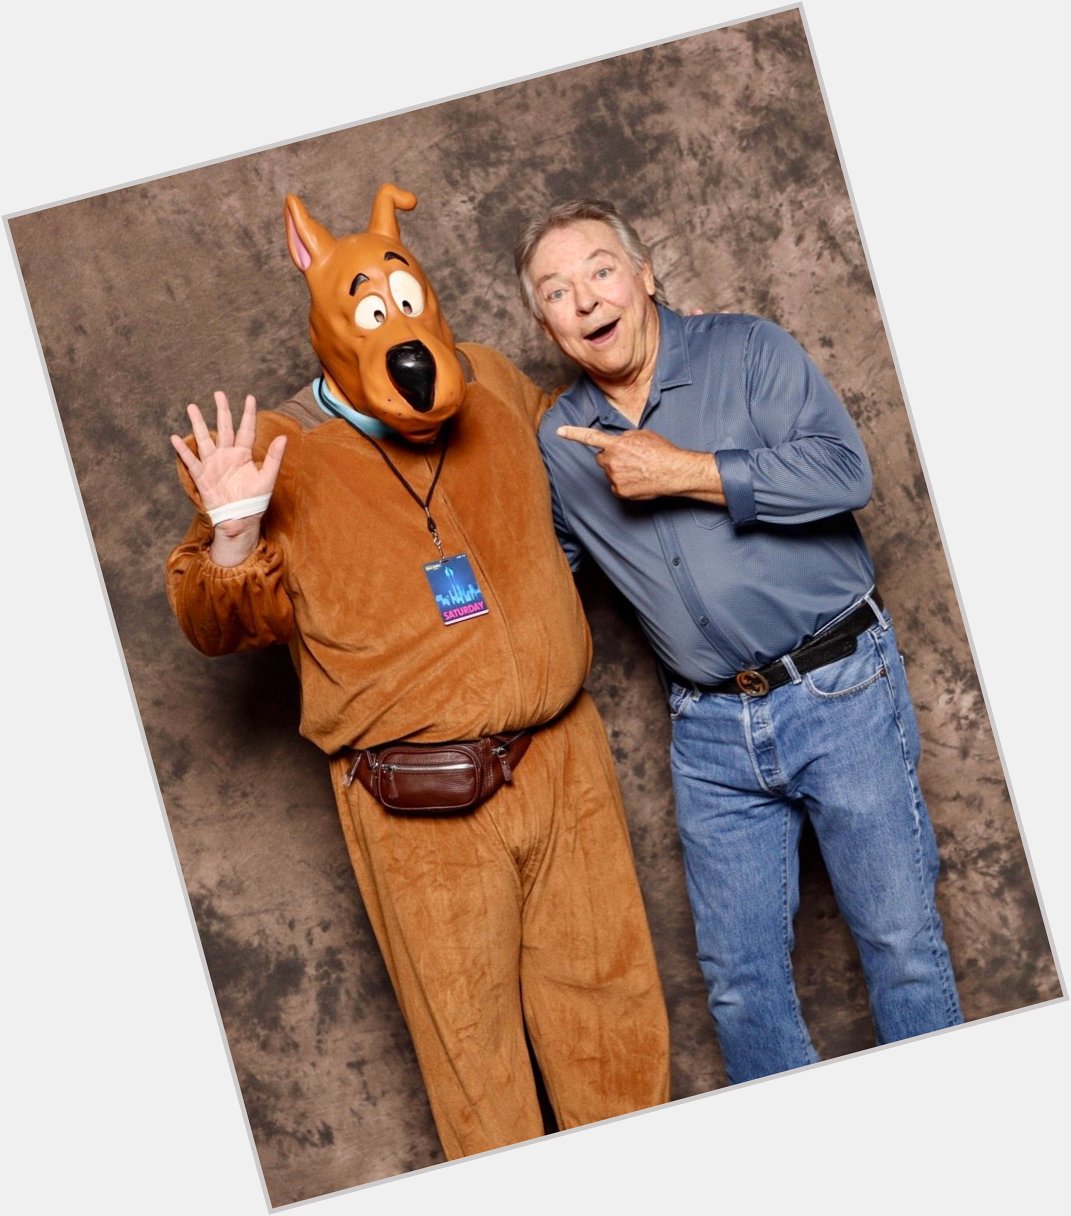 Happy birthday to Frank Welker, another prominent voice of my childhood! 